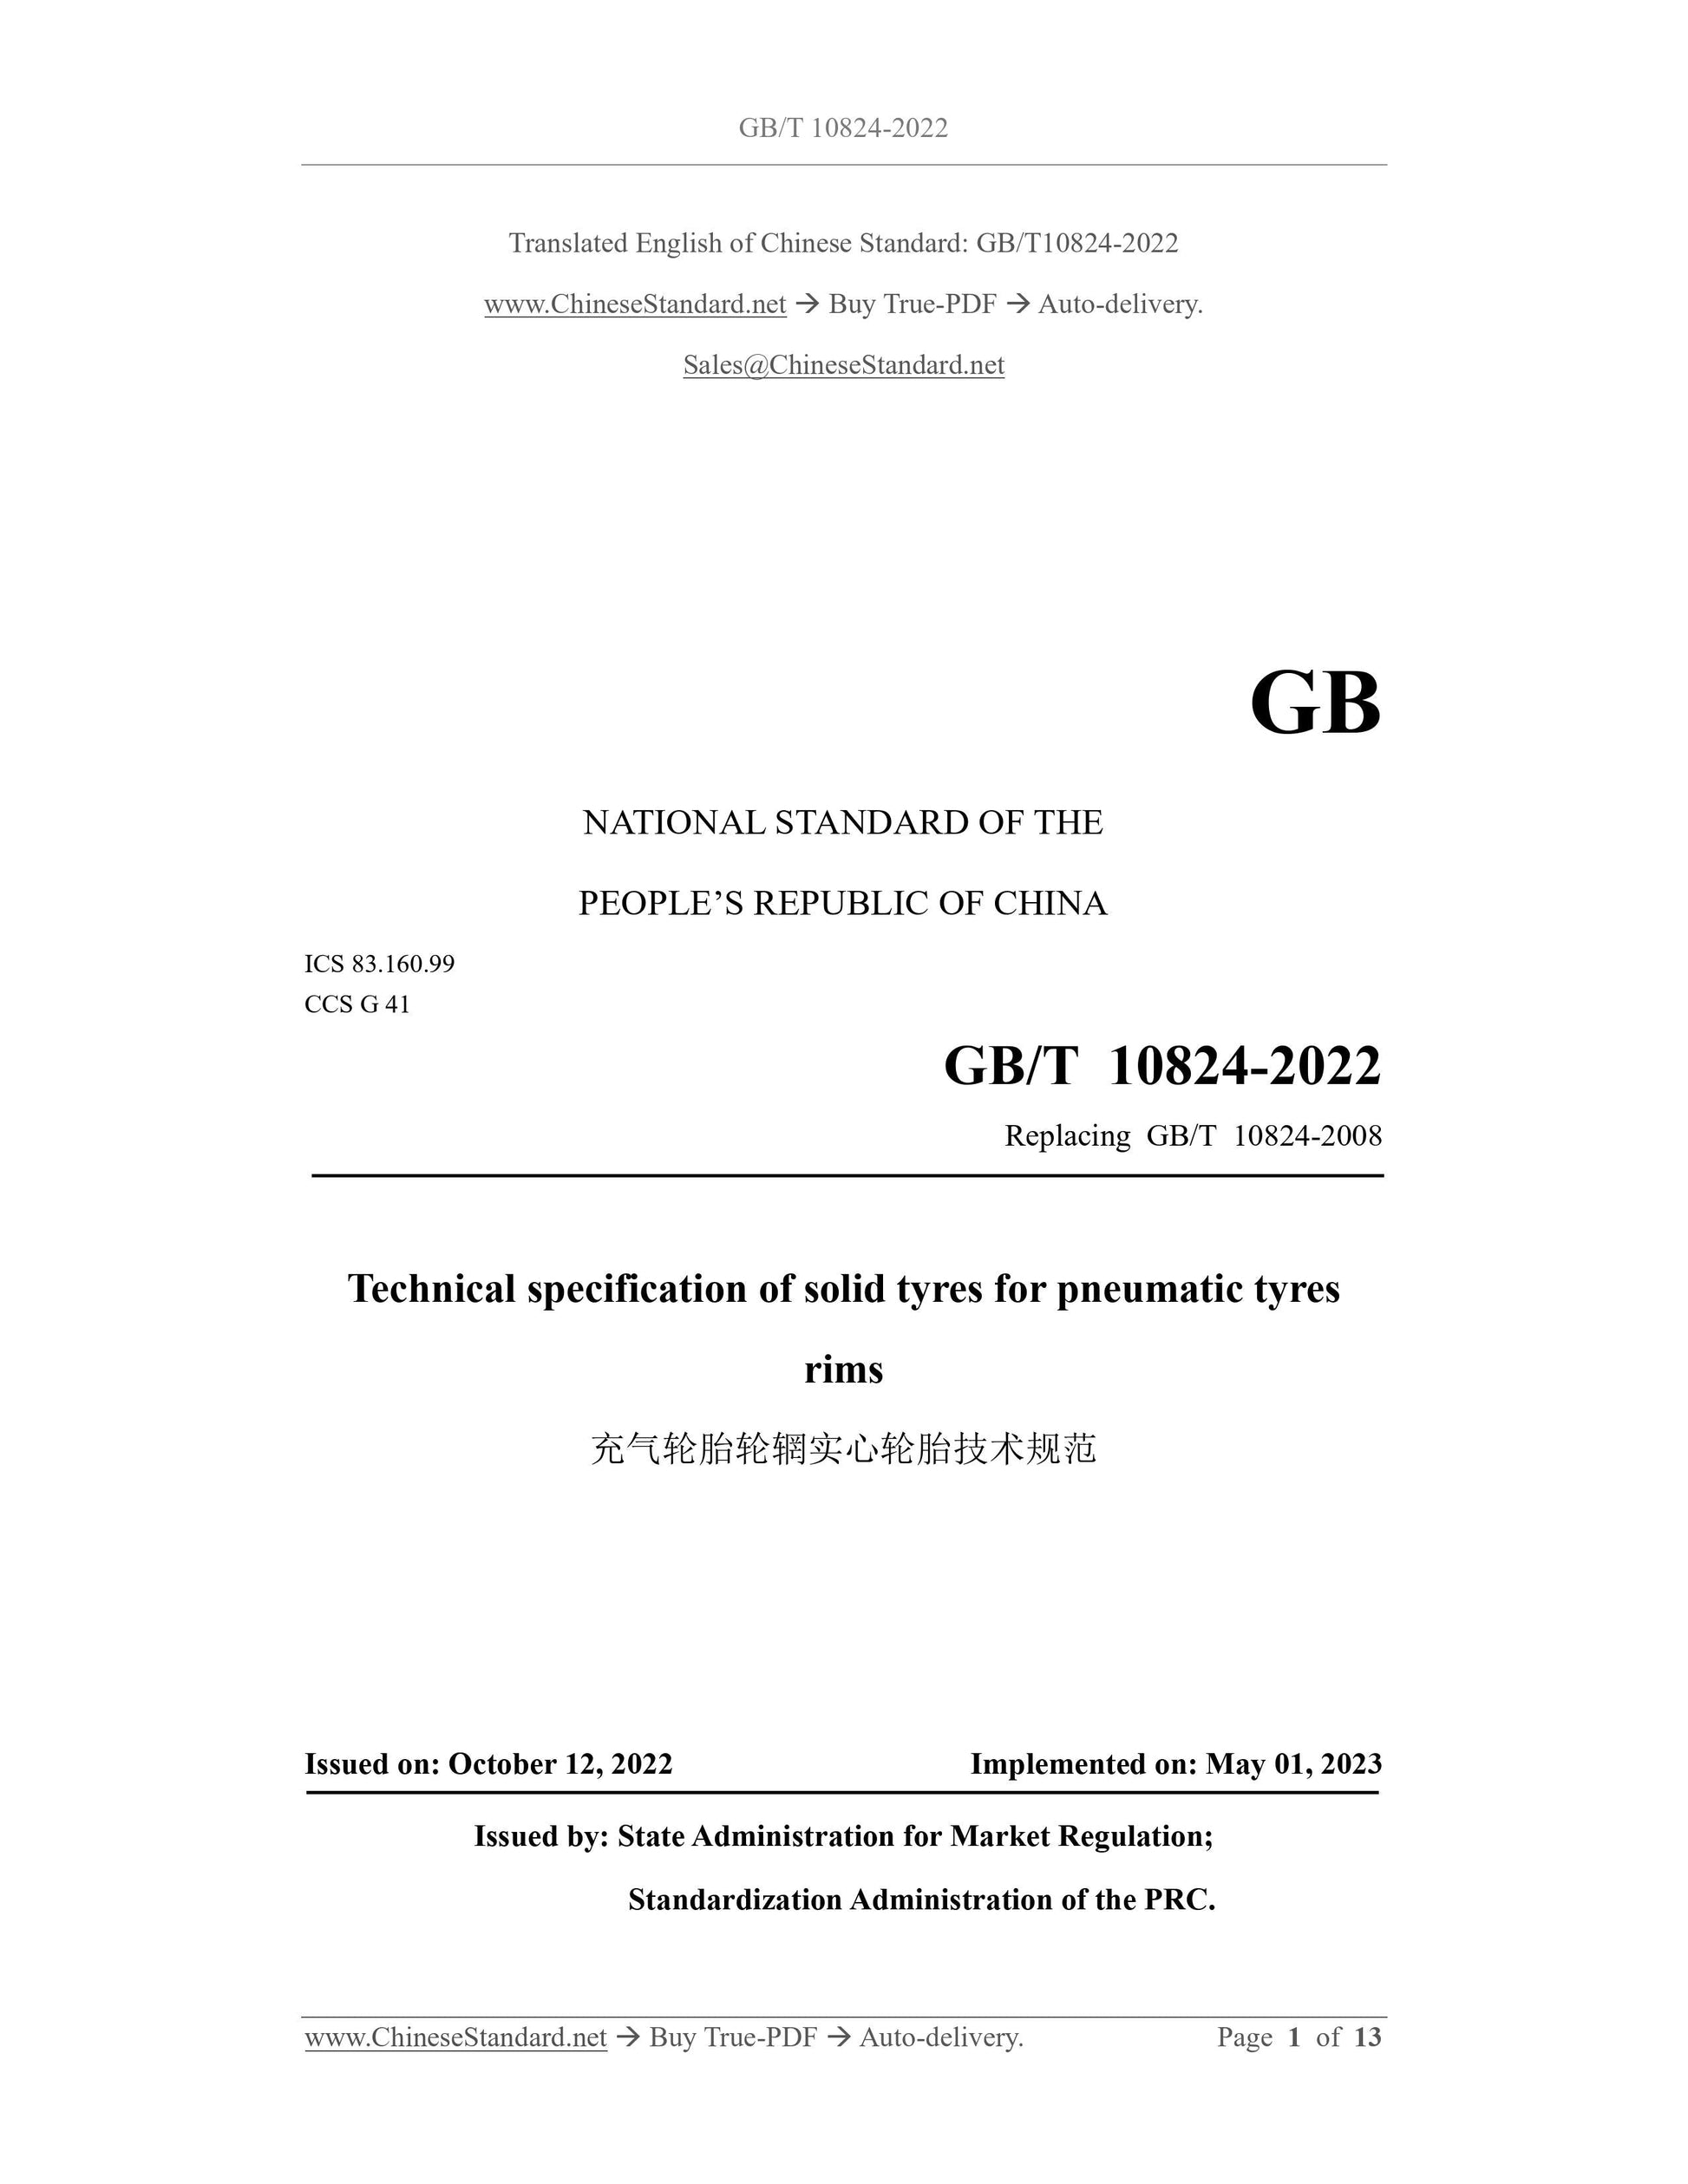 GB/T 10824-2022 Page 1